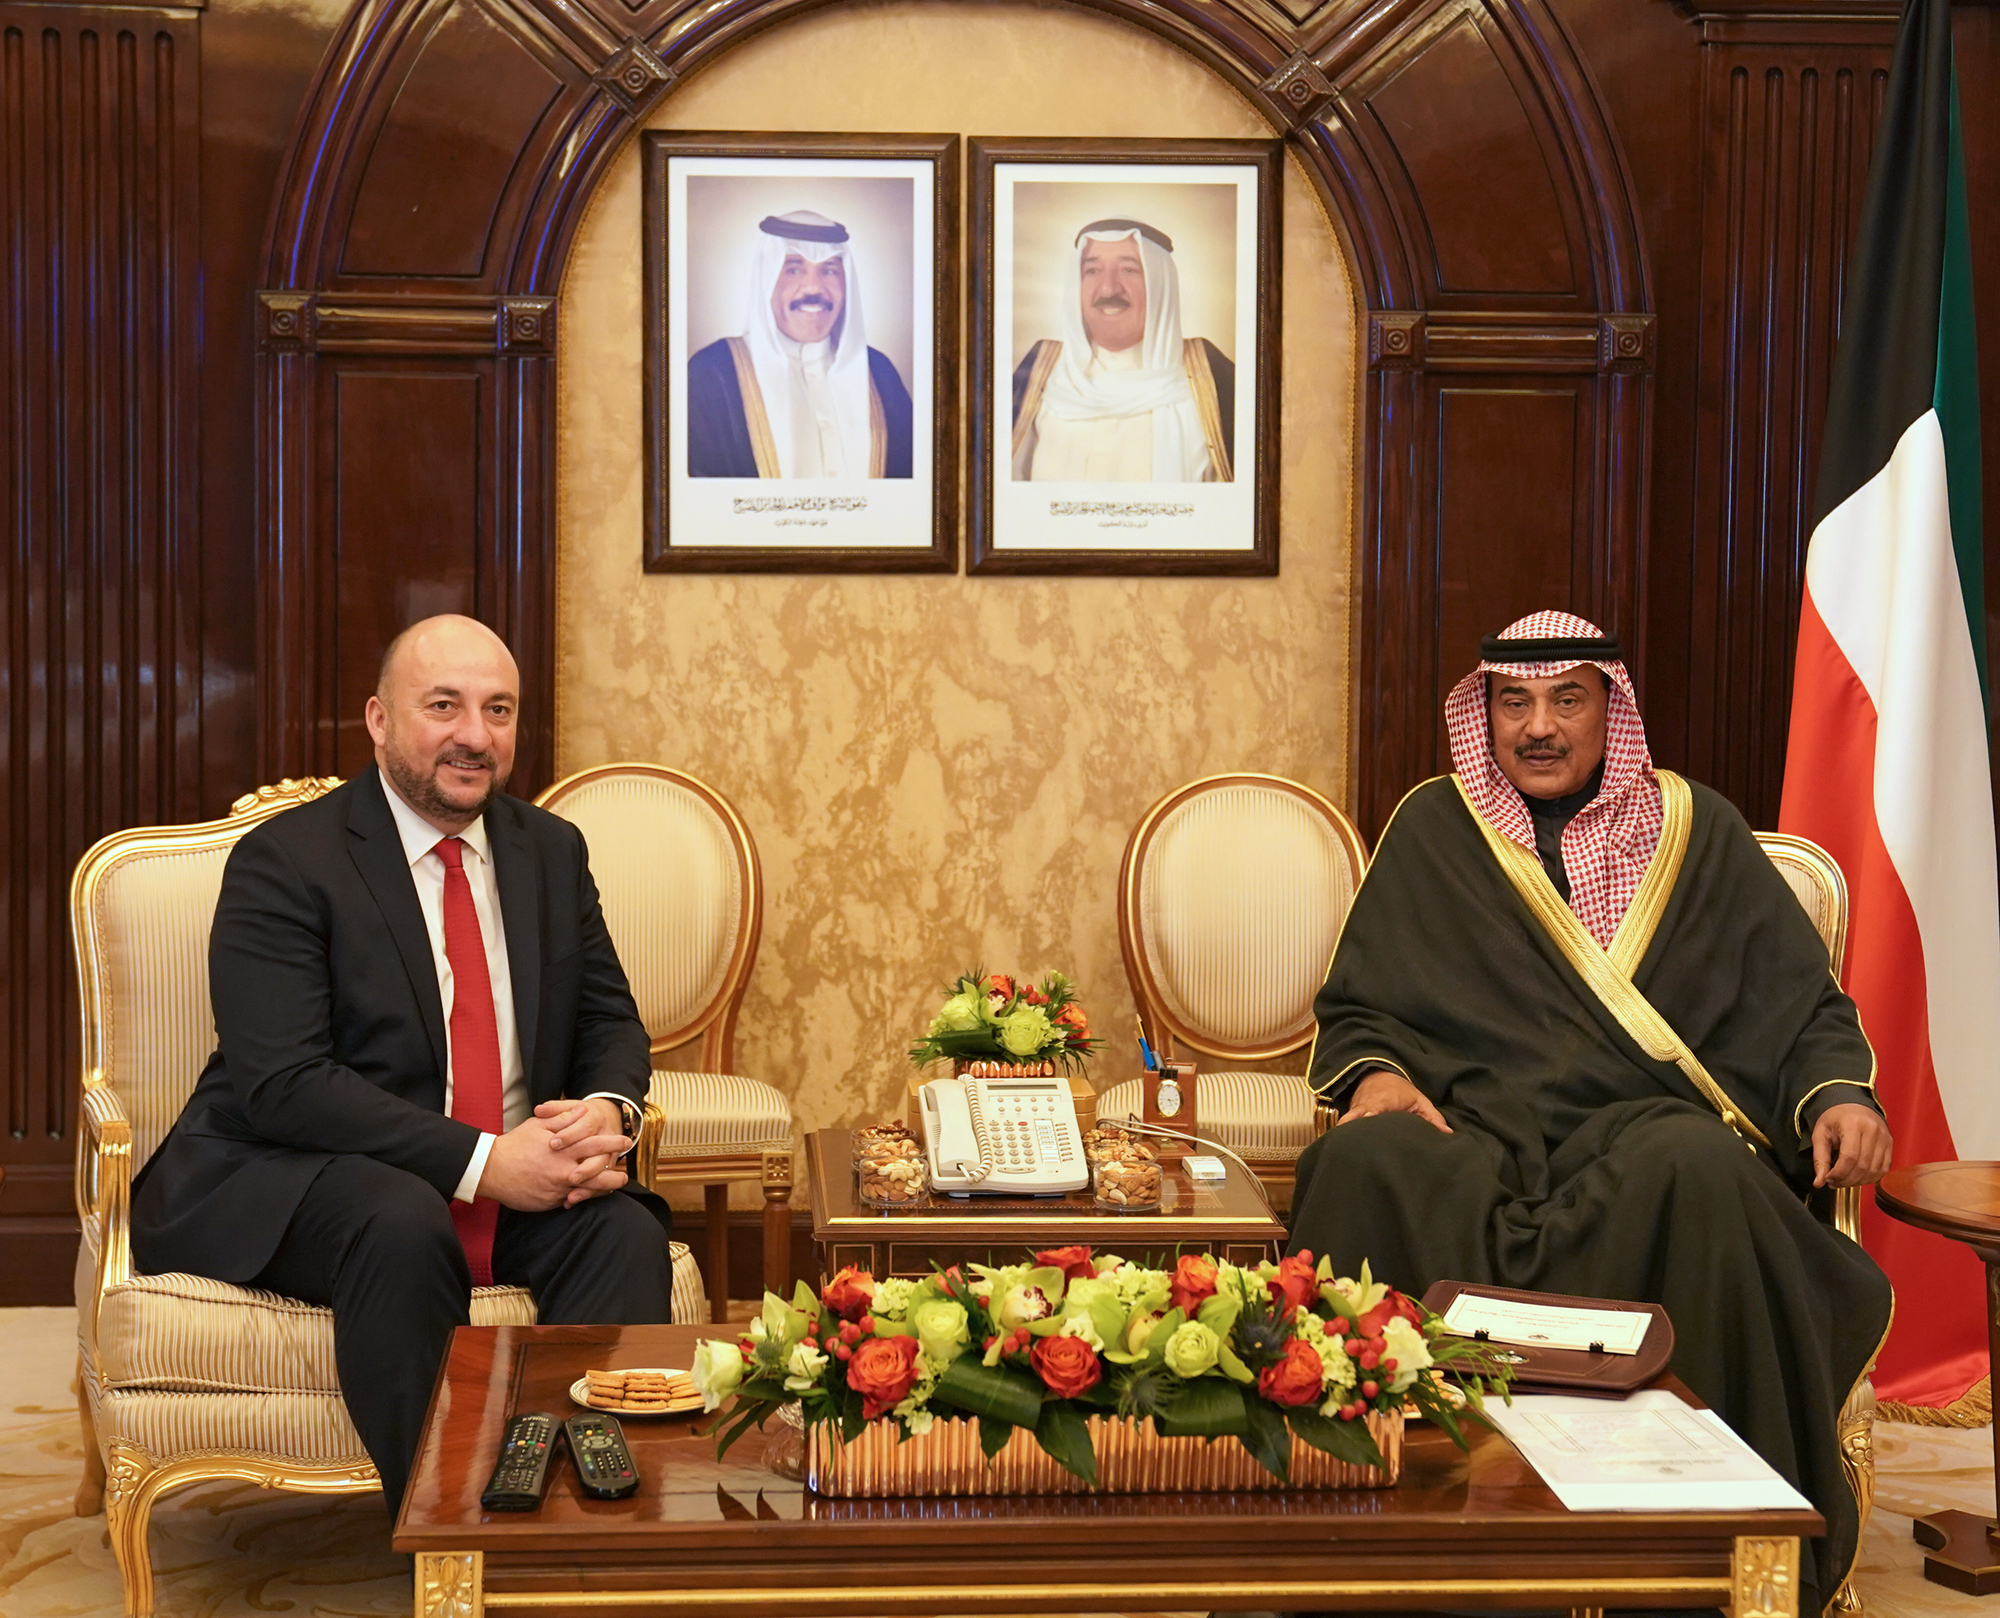 H.H the Prime Minister received Deputy Prime Minister and Economic Minister of the Luxembourg